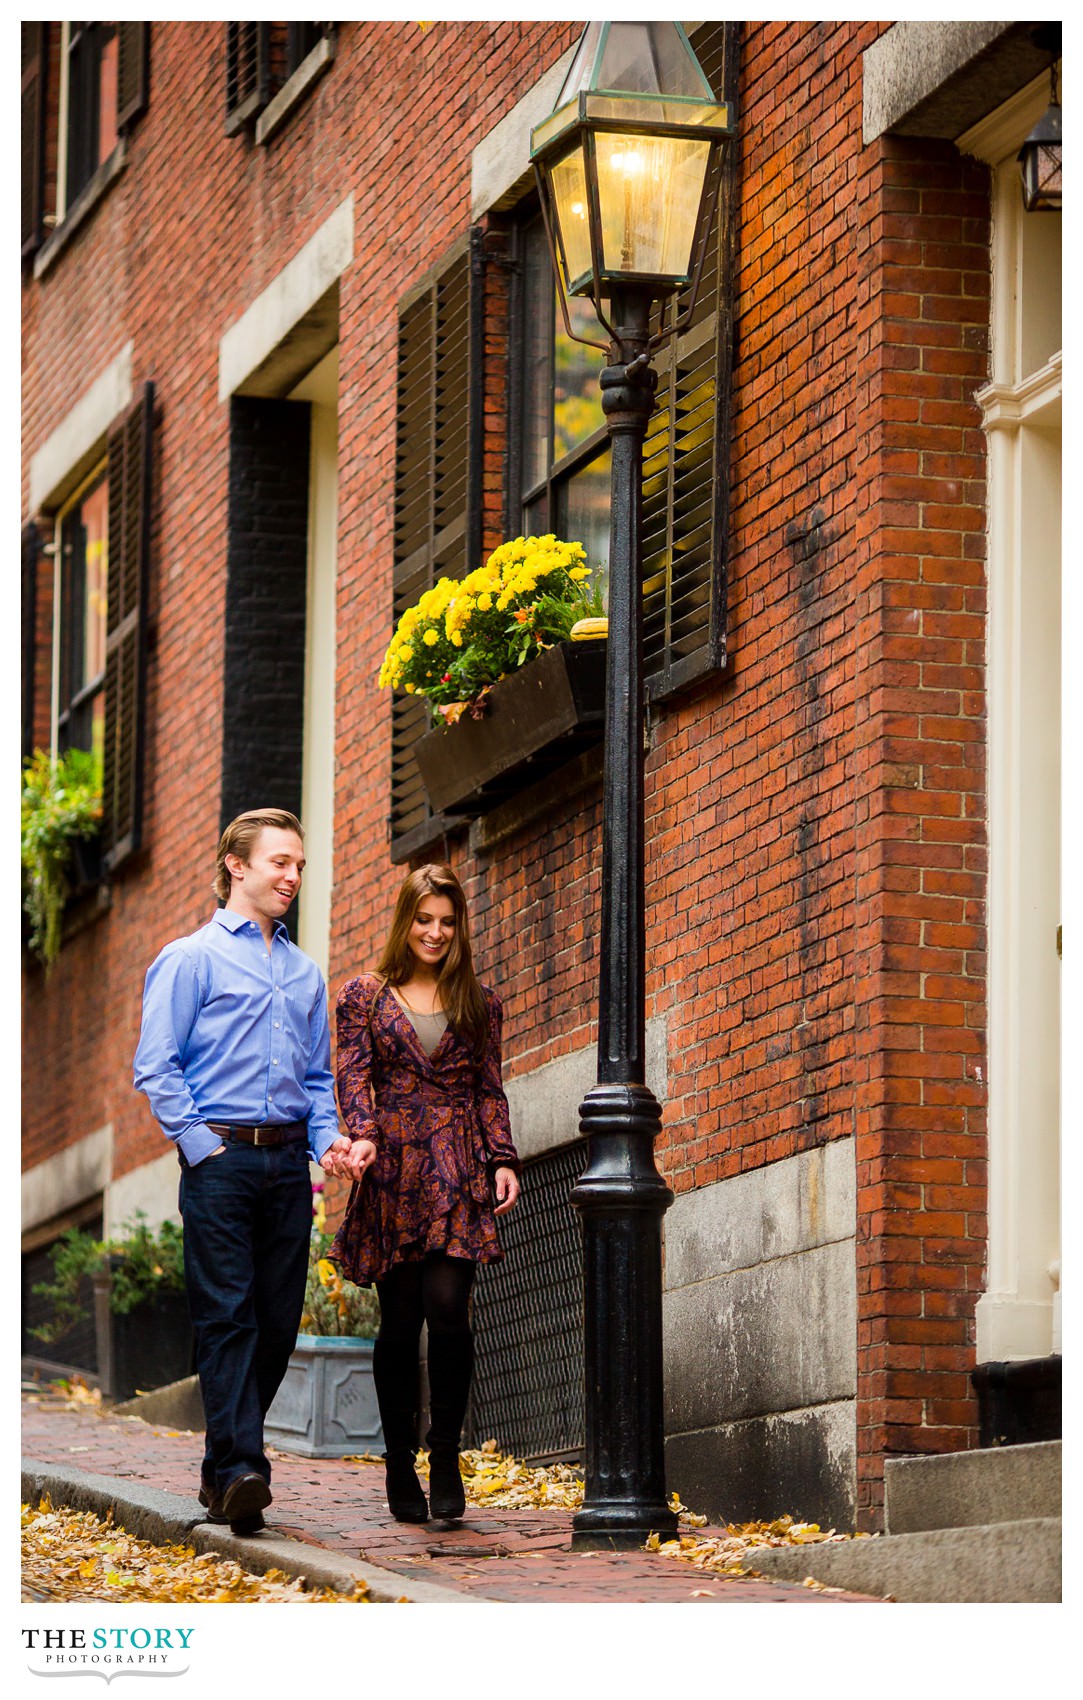 acorn street engagement photos in Beacon Hill